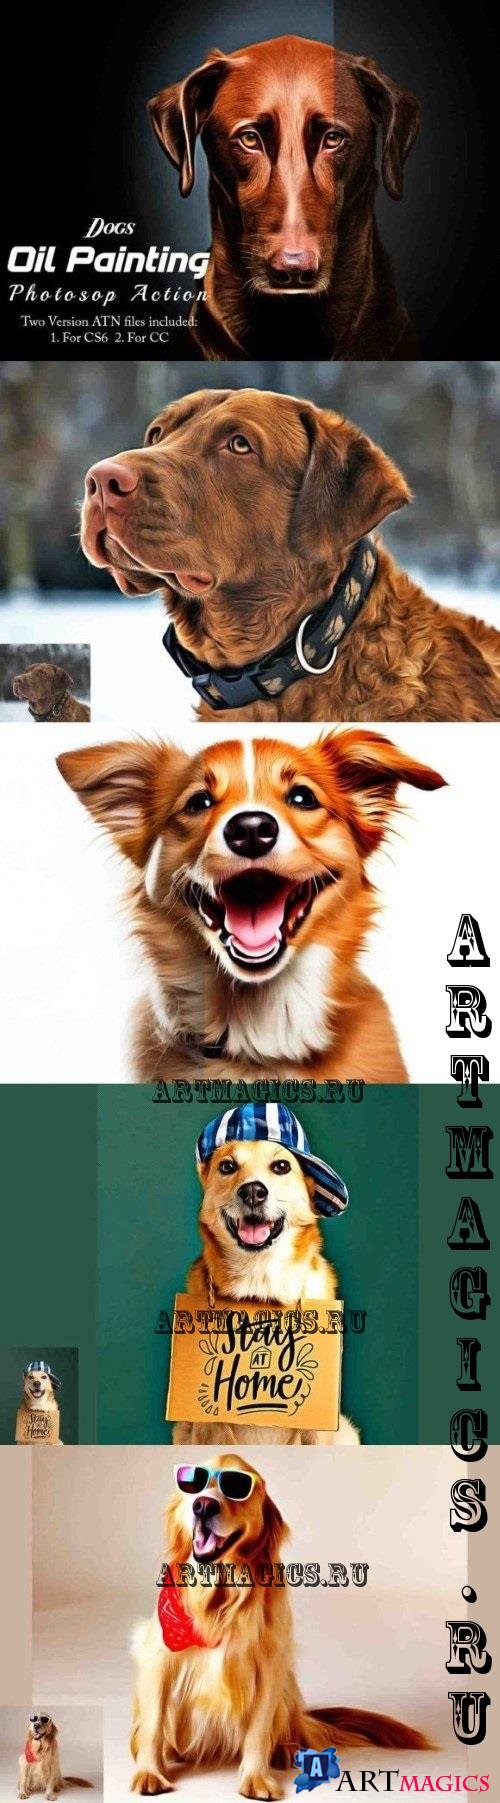 Dogs Oil Painting Photoshop Action - 92043134